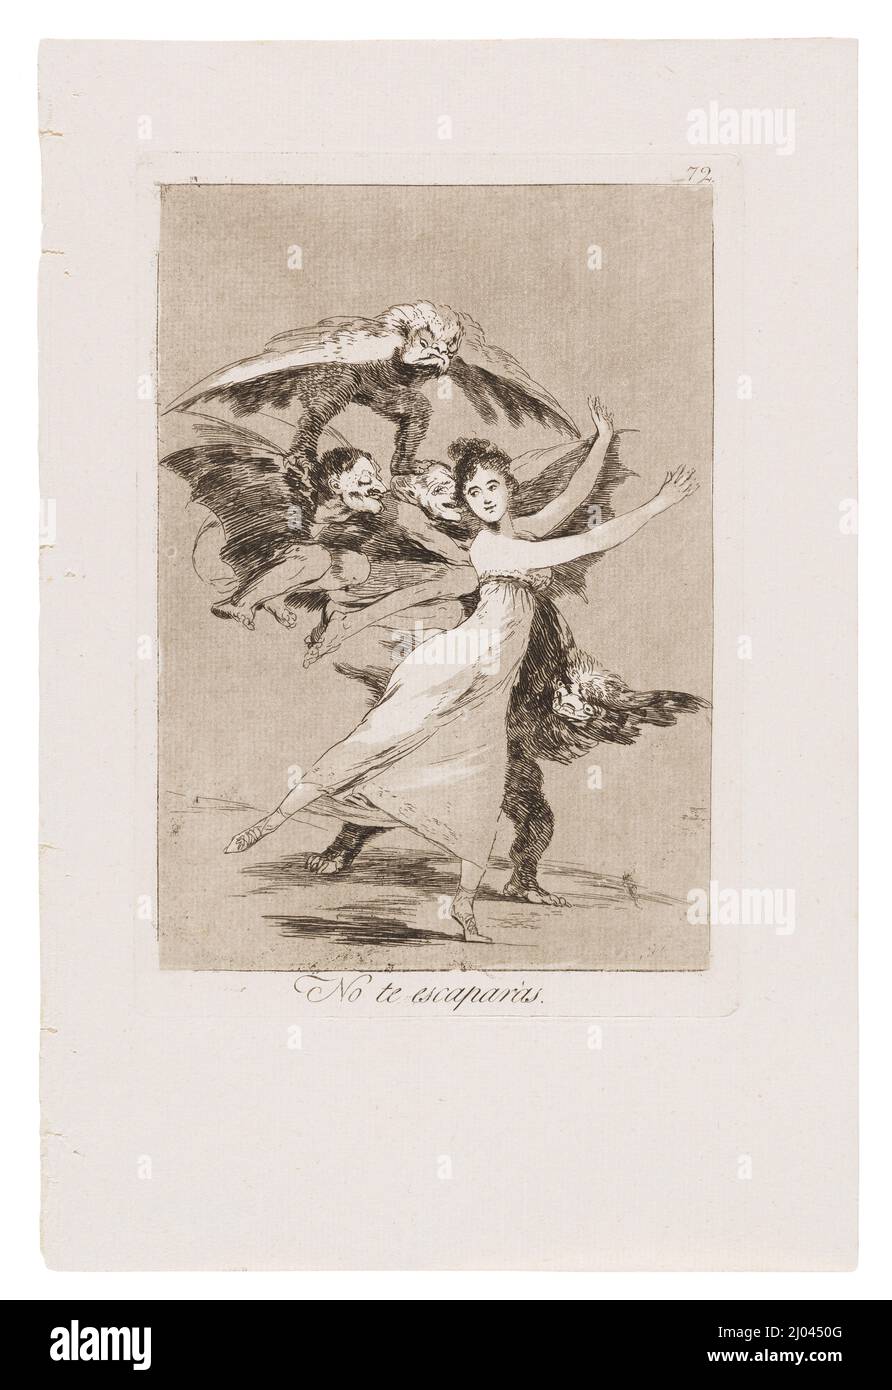 You will not escape. Francisco Goya y Lucientes (Spain, Fuendetodos, 1746-1828). Spain, 1799. Prints; etchings. Etching and burnished aquatint Stock Photo